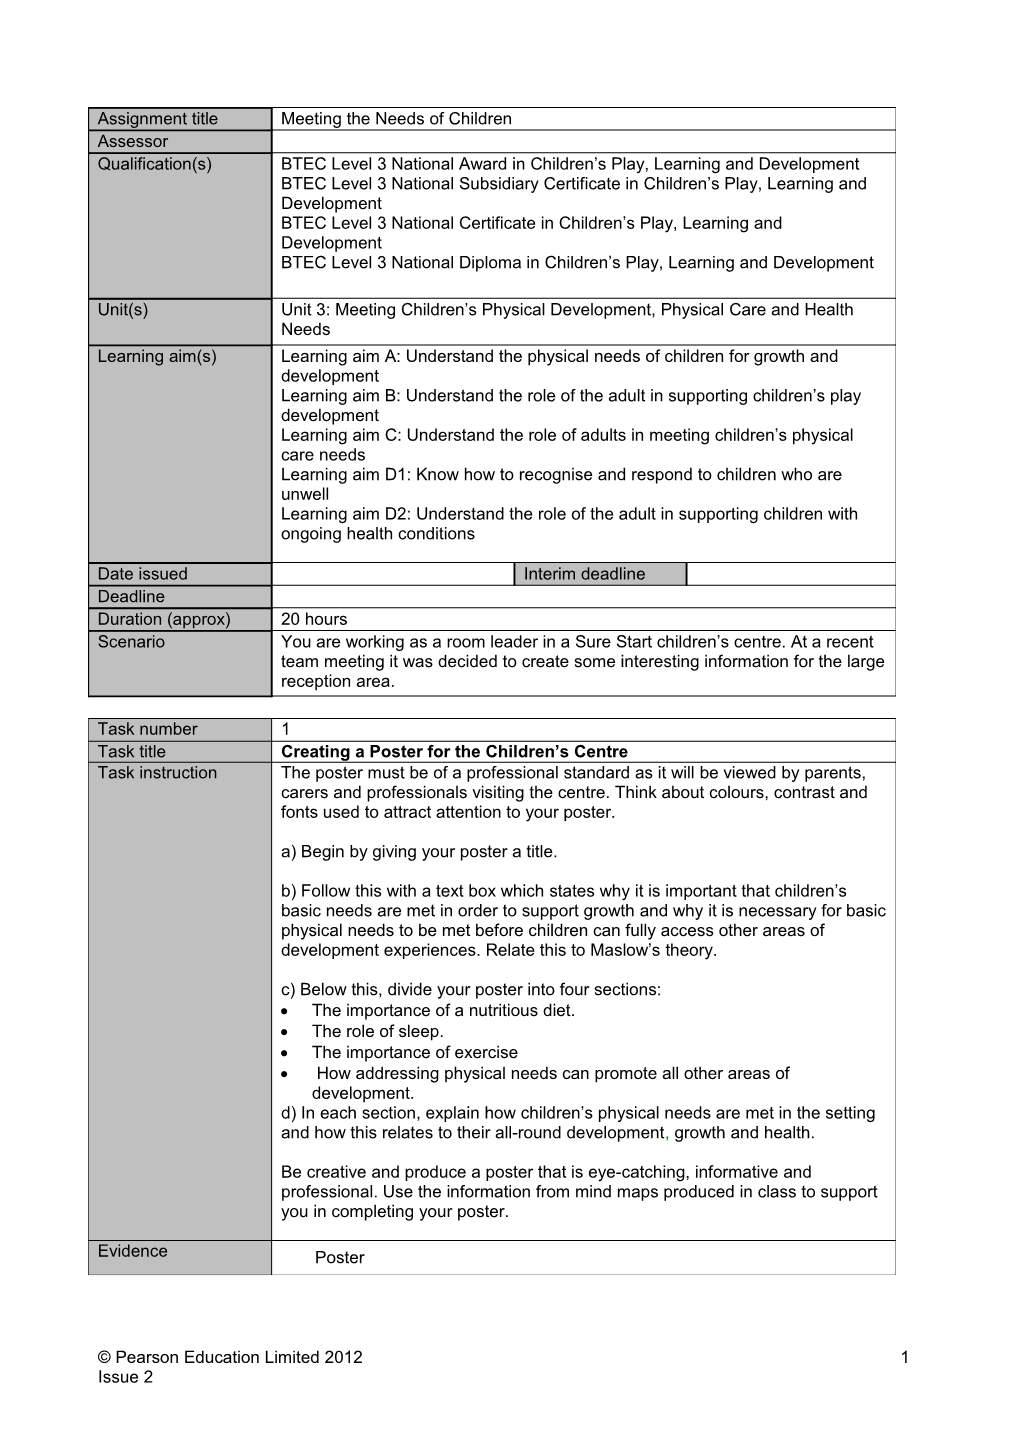 Authorised Assignment Brief - Unit 3 - Learning Aim A,B,C,D